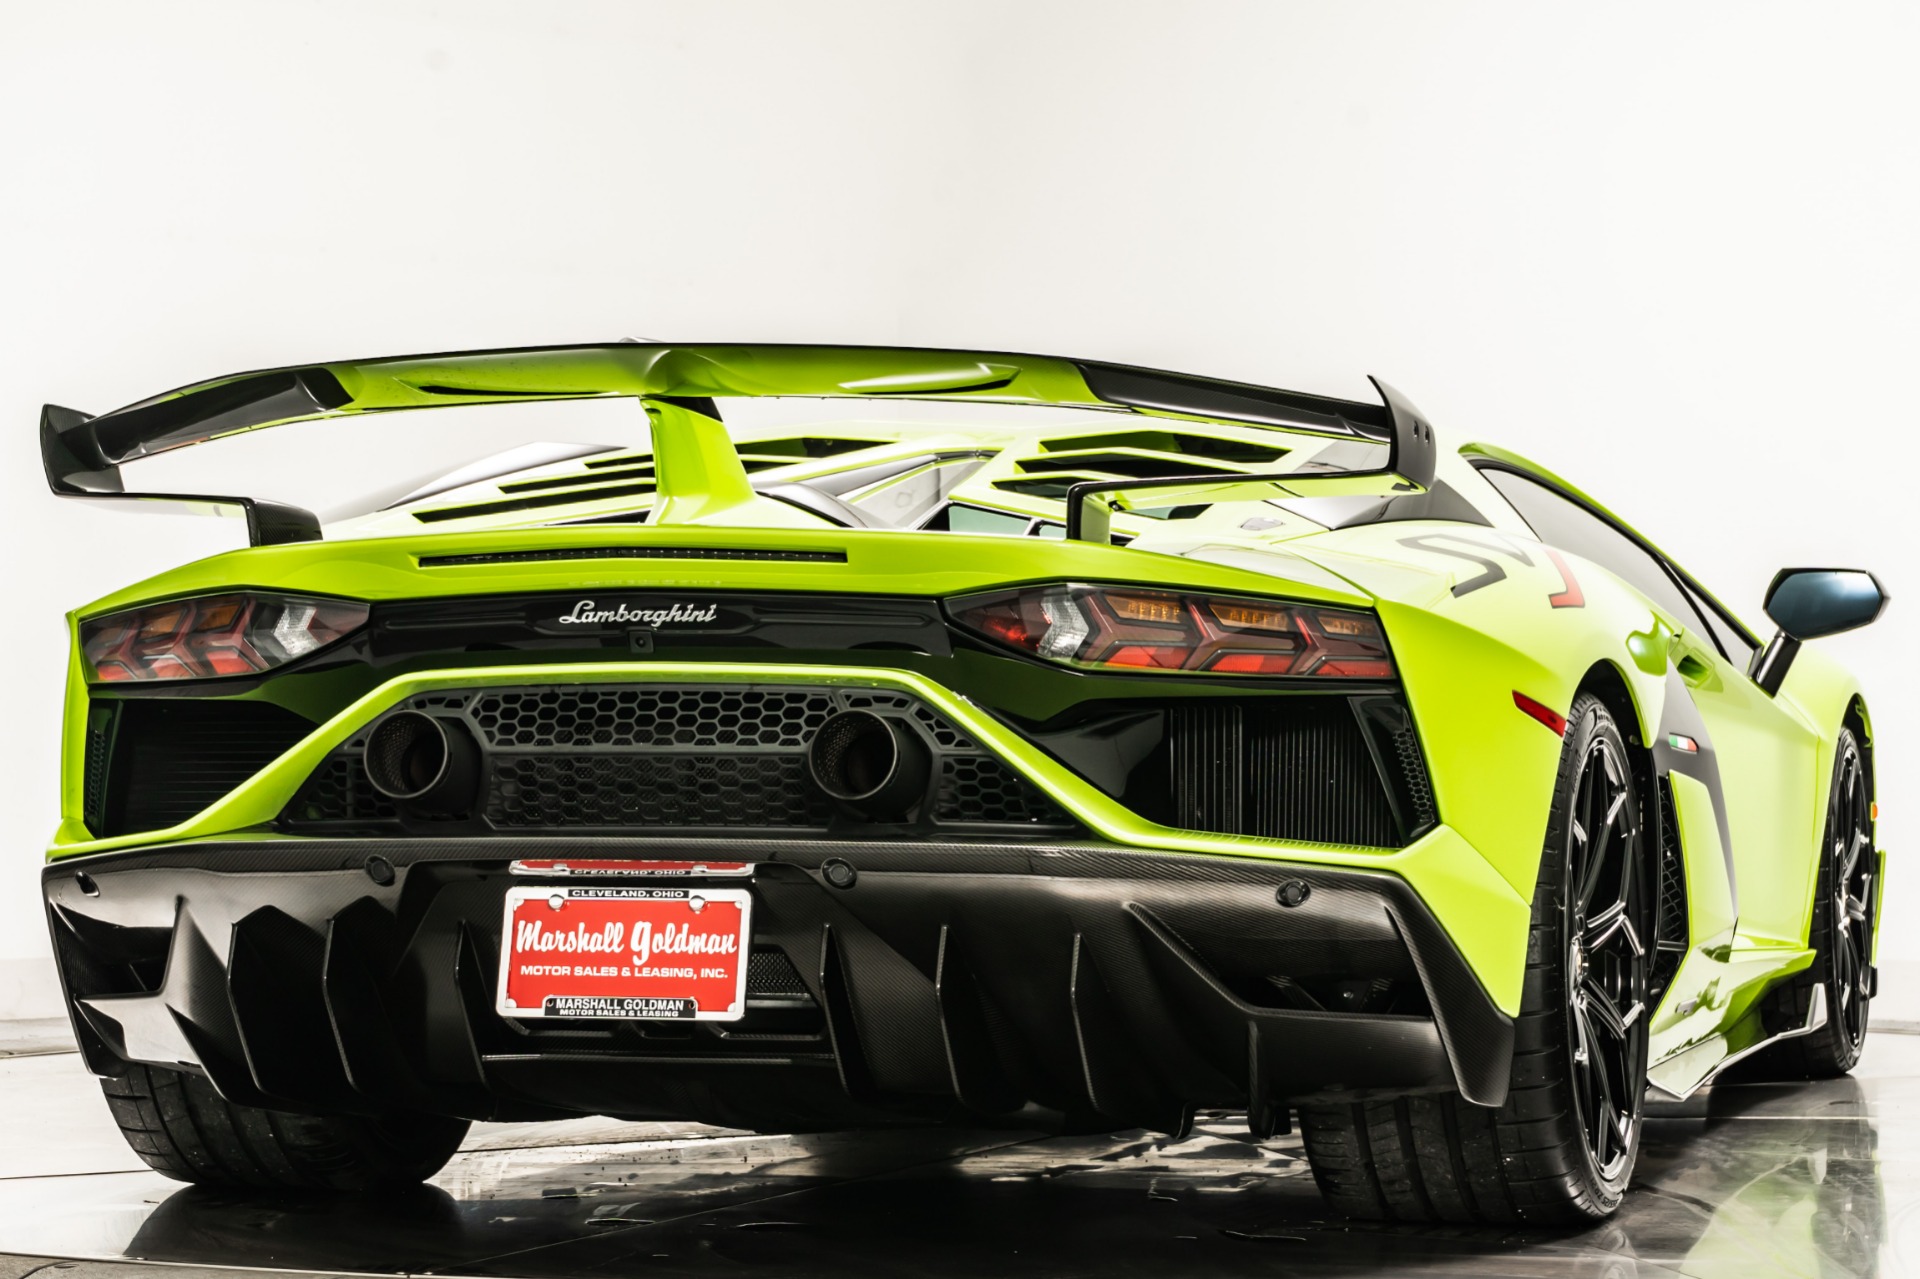 Lamborghini and Supreme: new collection for Spring-Summer 2020